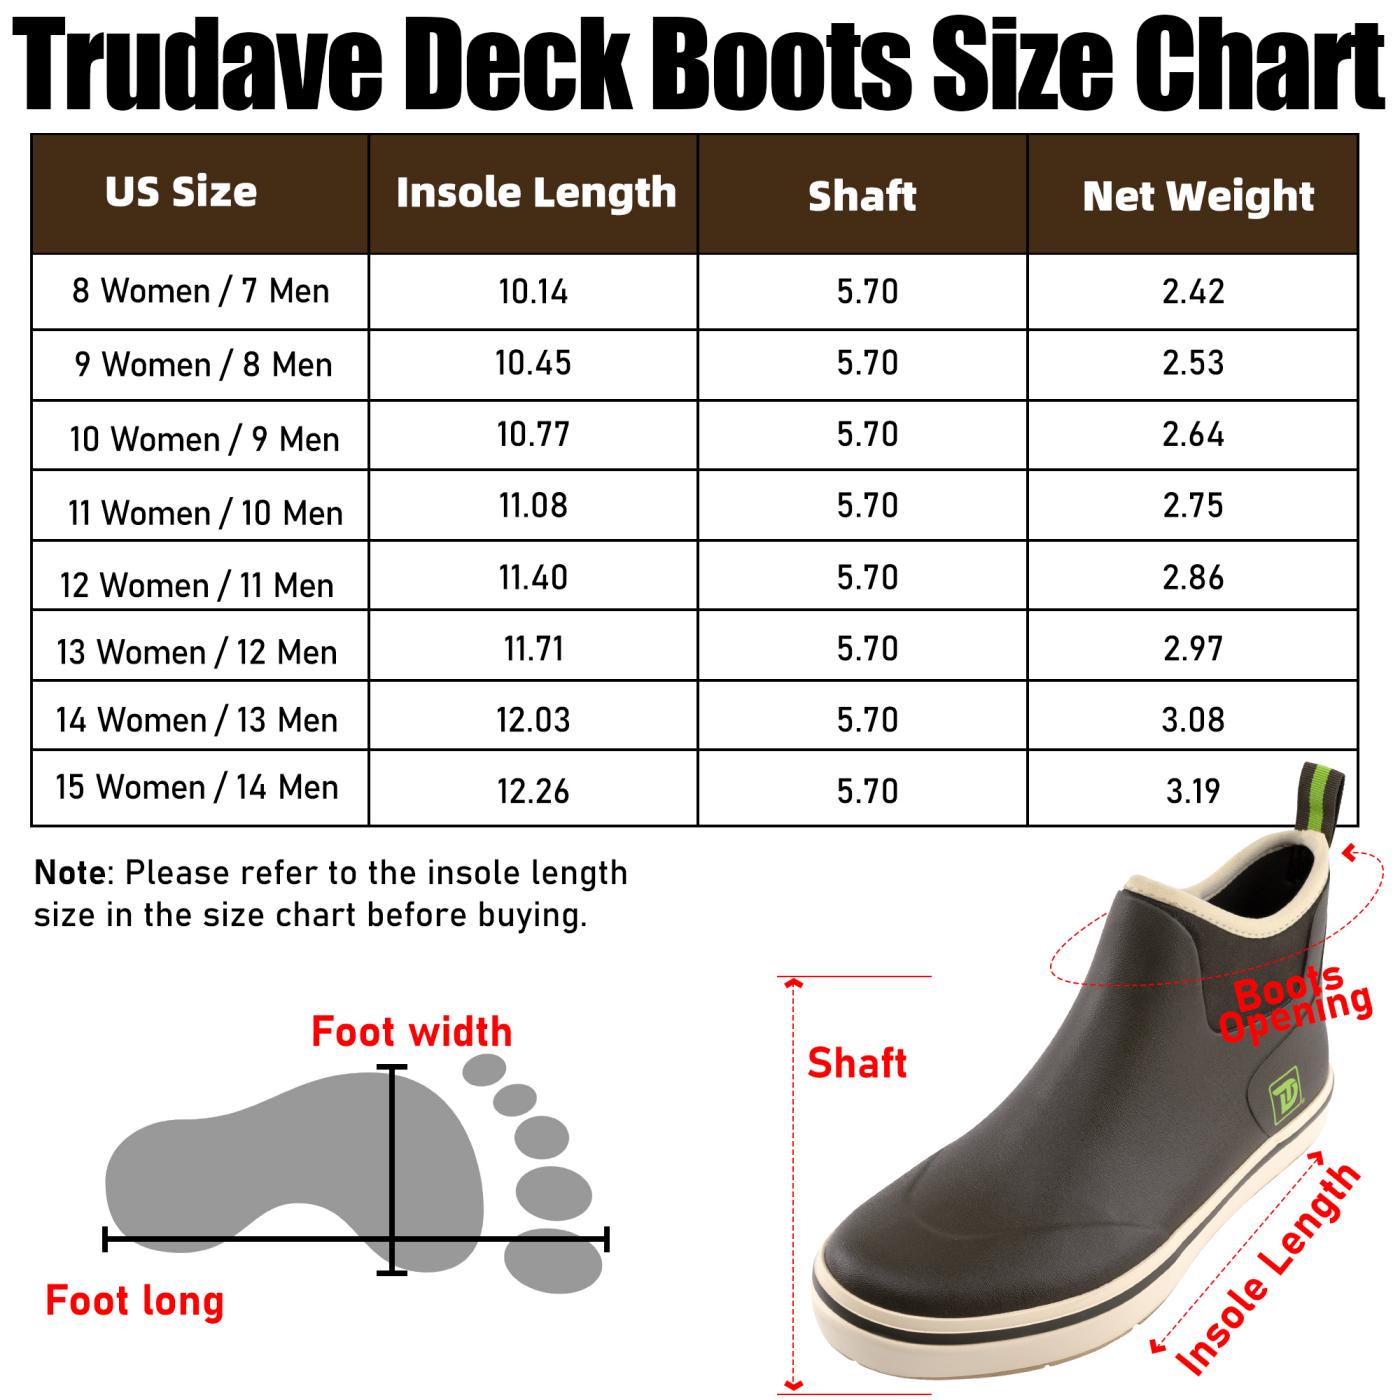 Trudave Blue Camo 5.7 INCH Men's Ankle Deck Boots